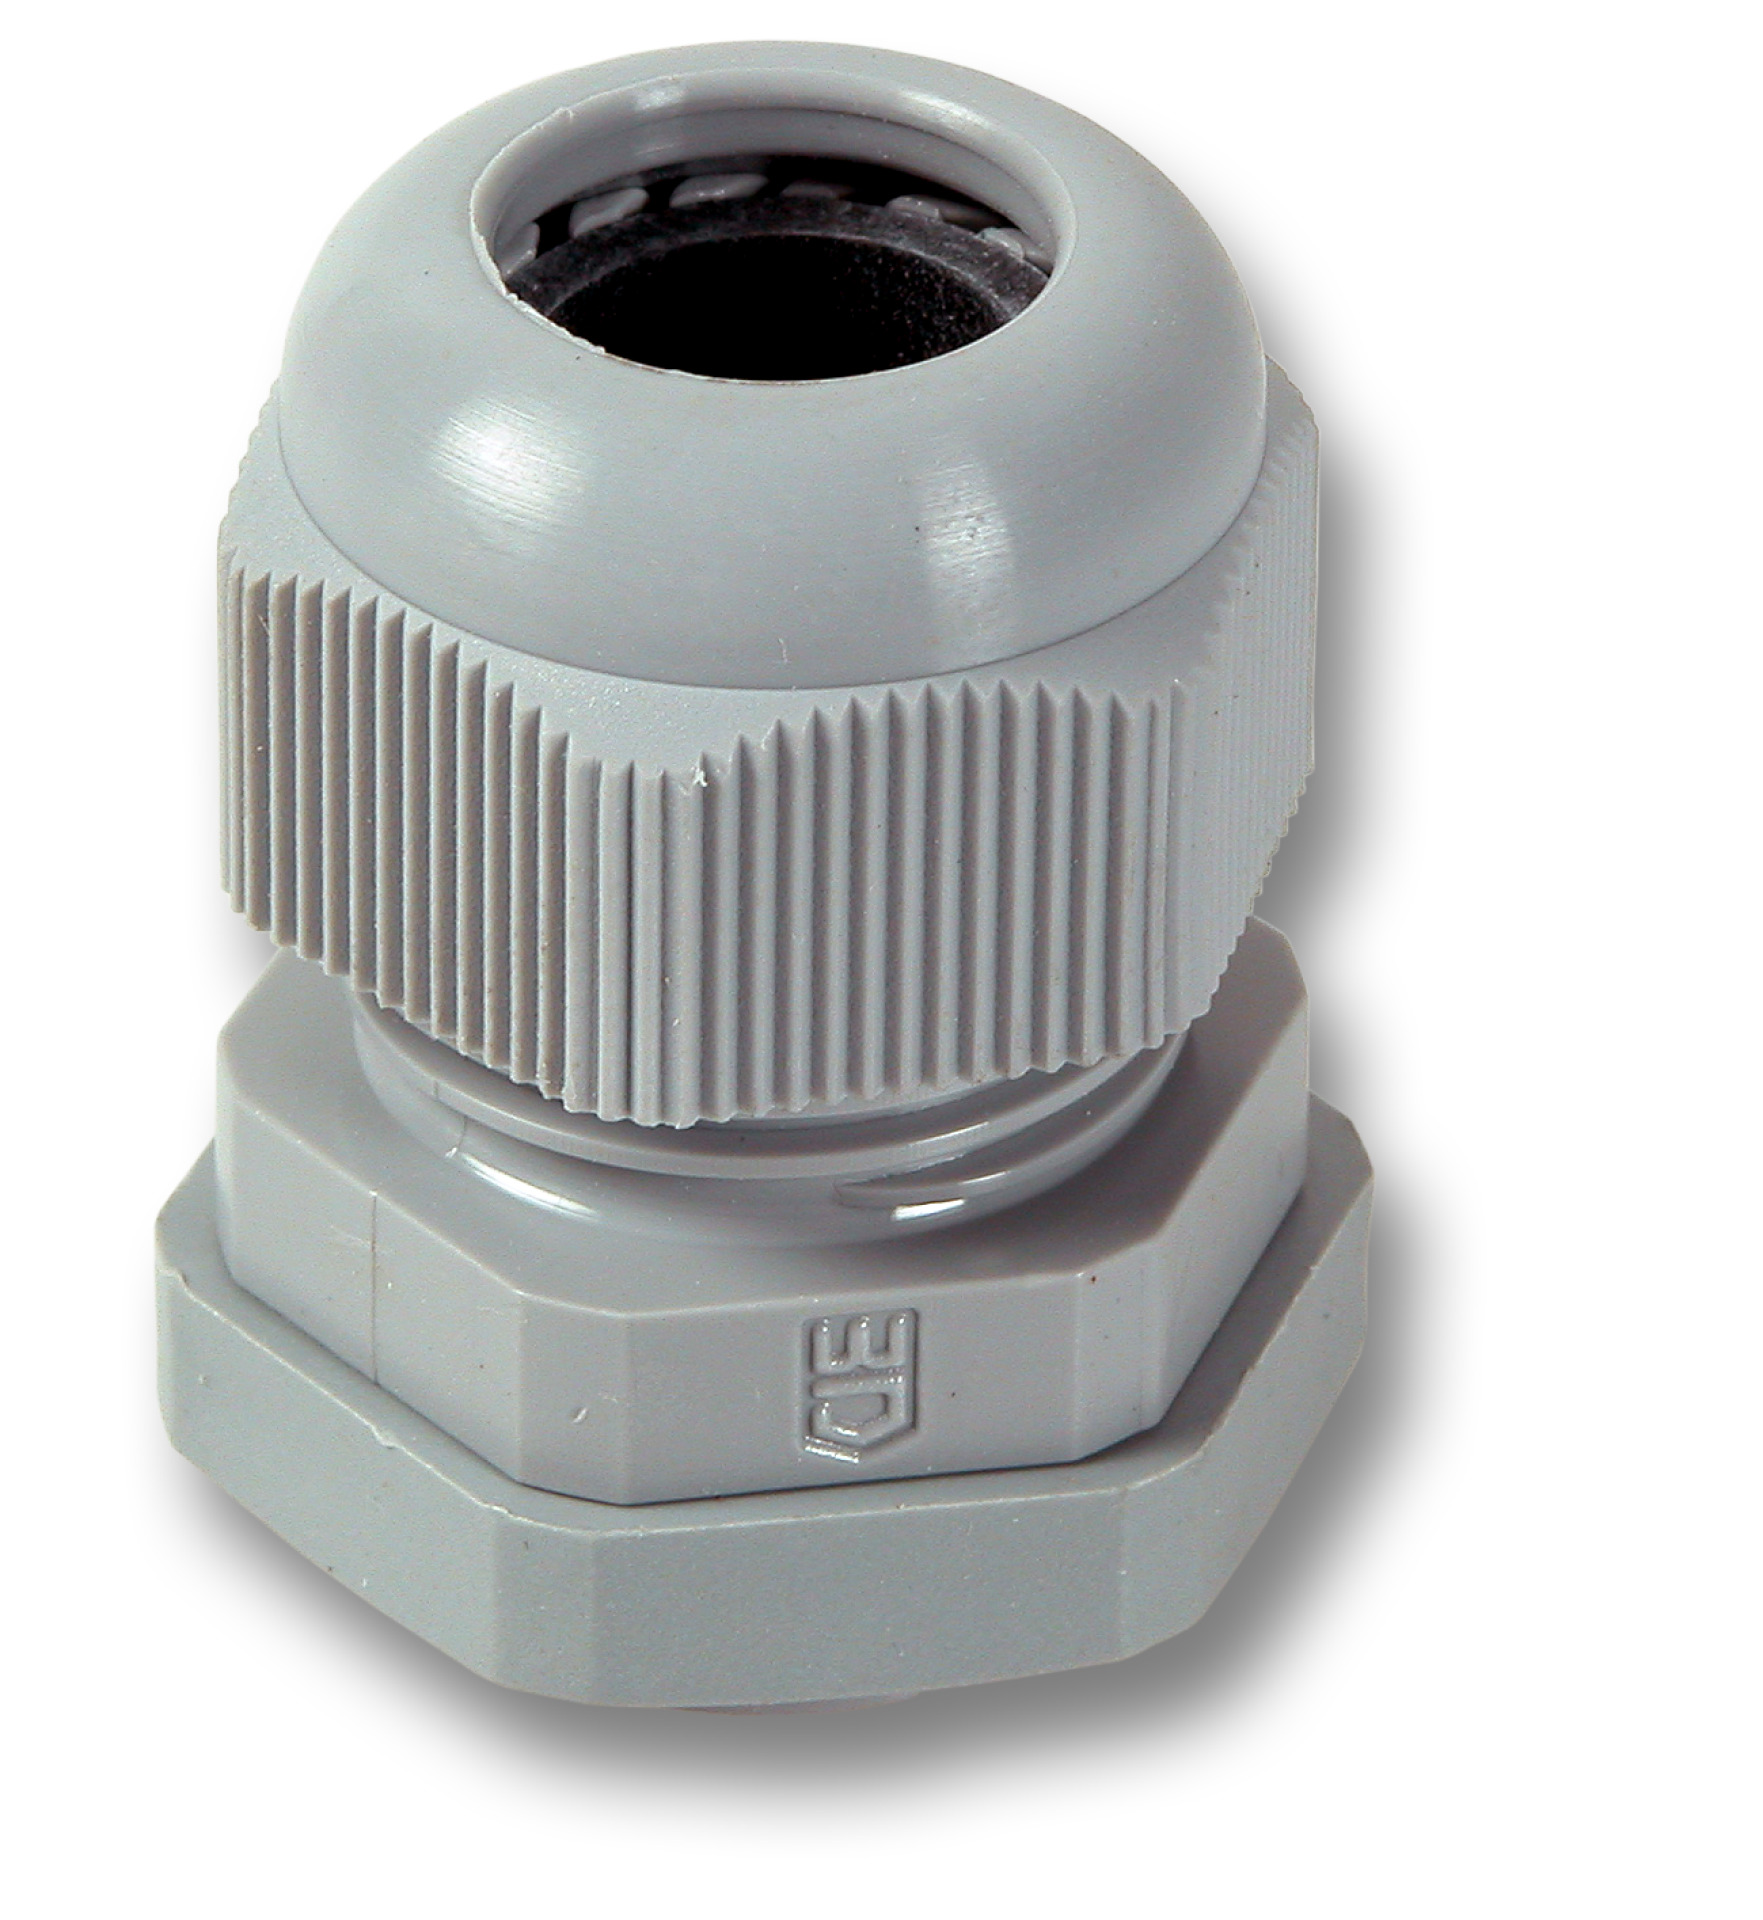 PG16 Cable Glands conical grey, RAL7035